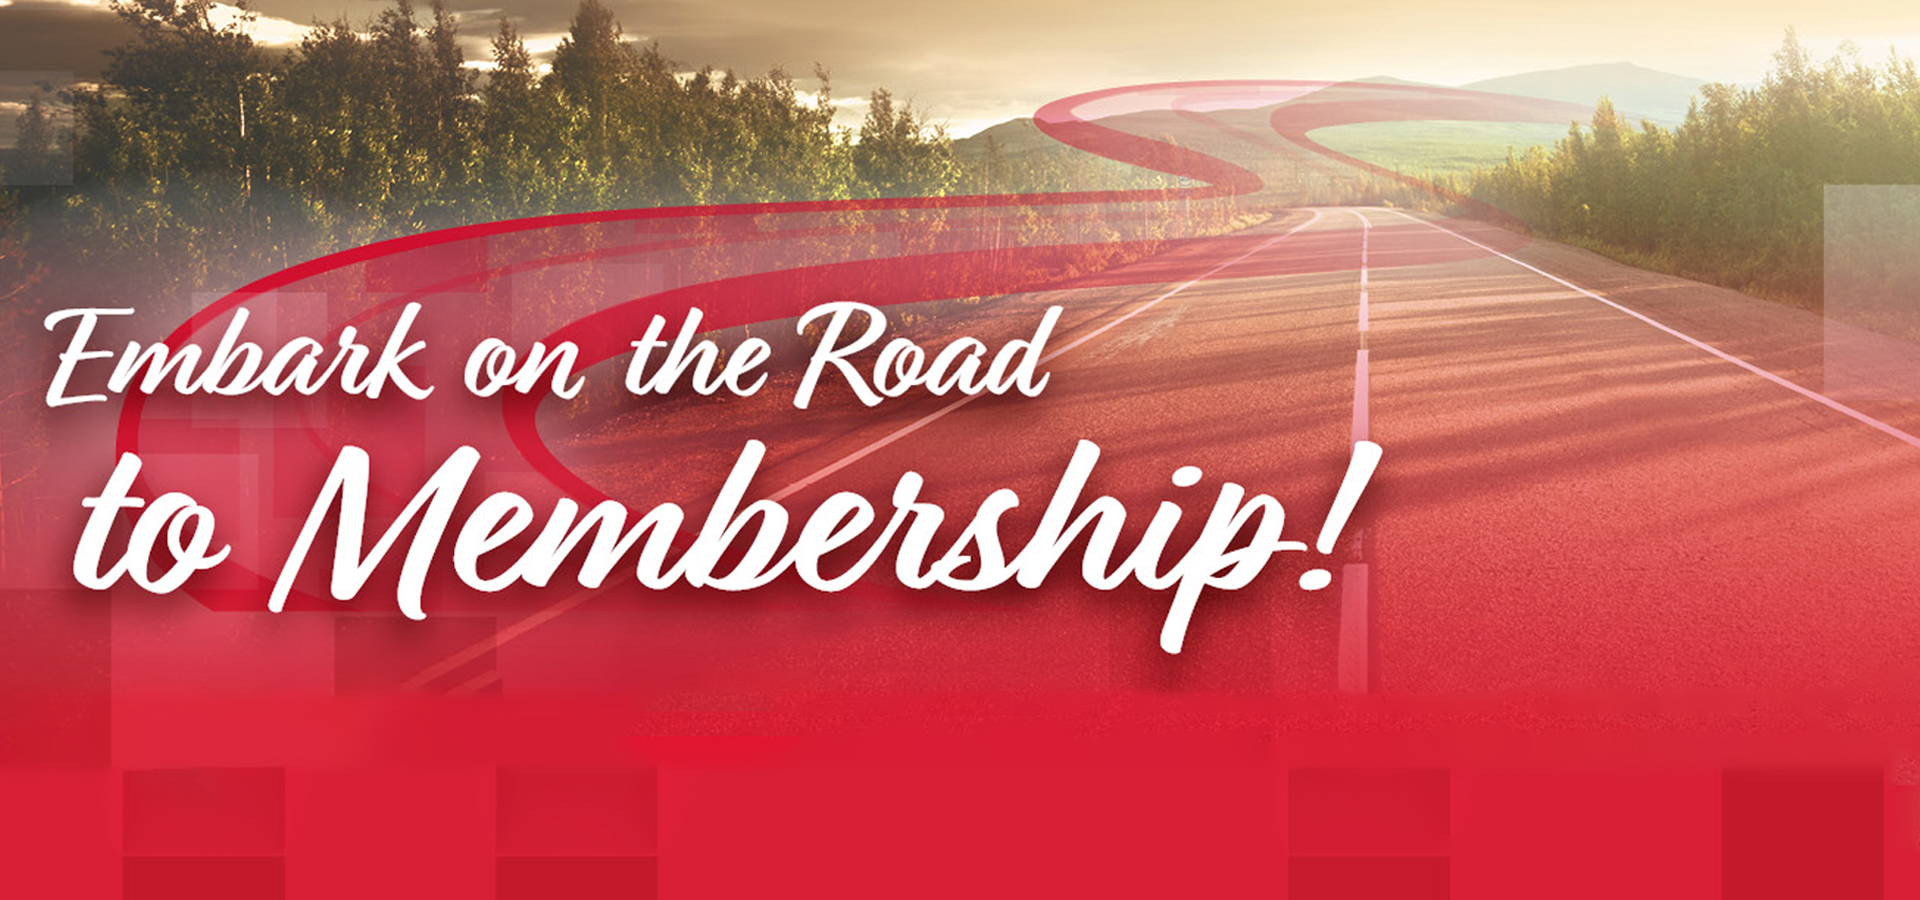 Embark on the Road to Membership at 1st Ed!